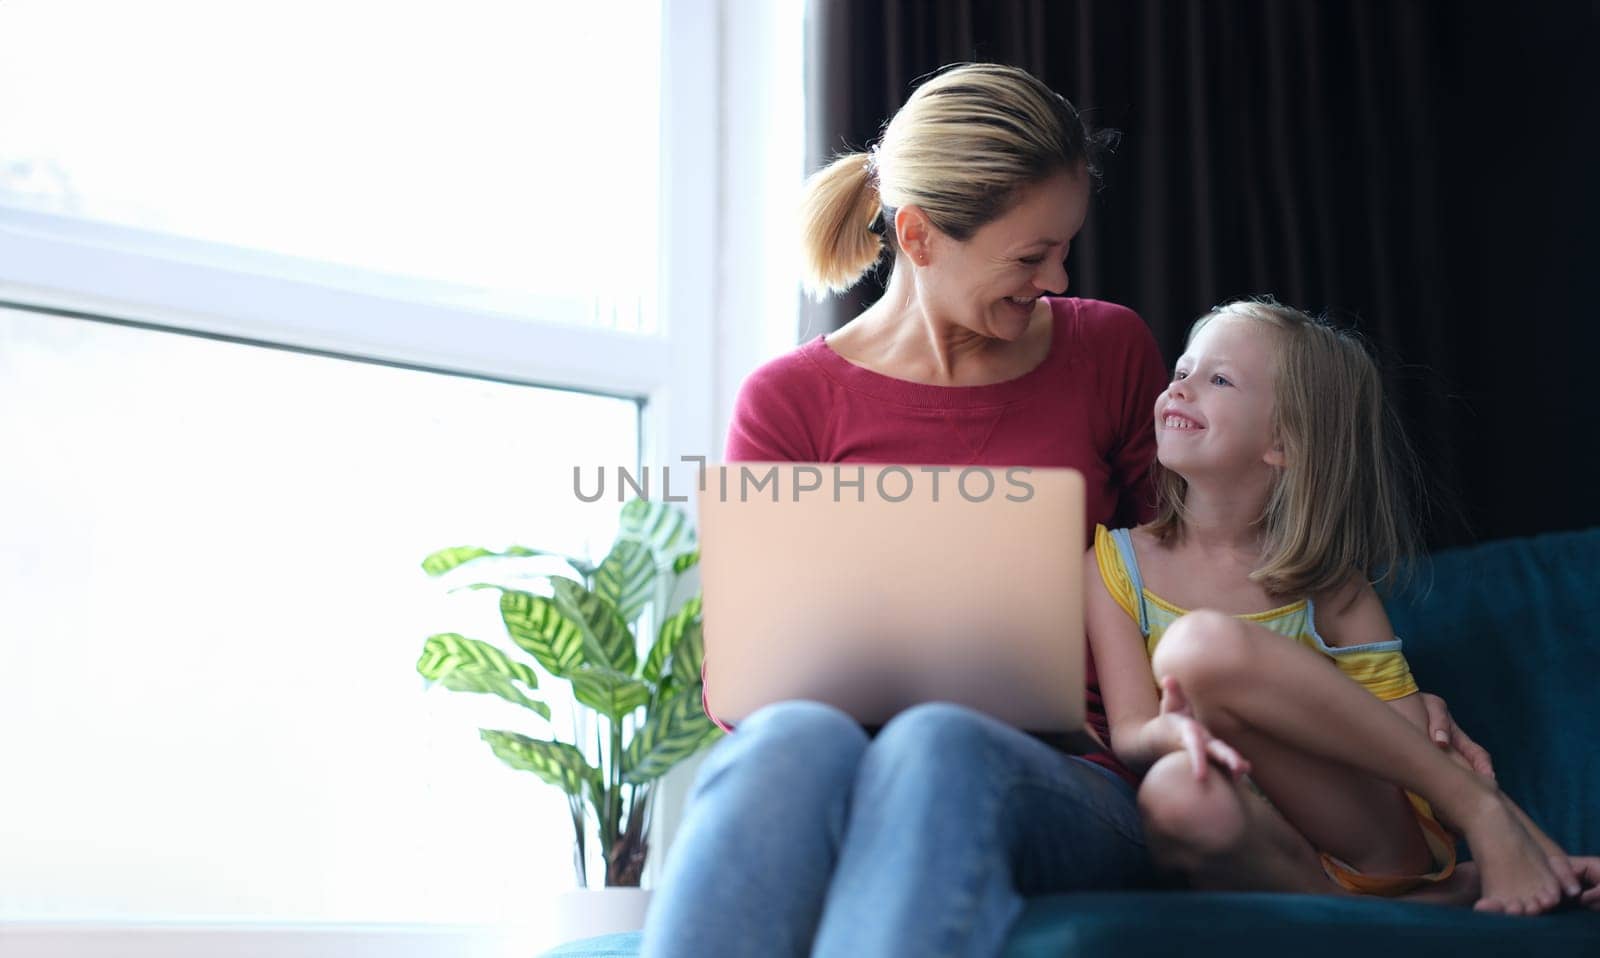 Little girl and mom are sitting on couch with laptop on laps and talking. Online education for children concept